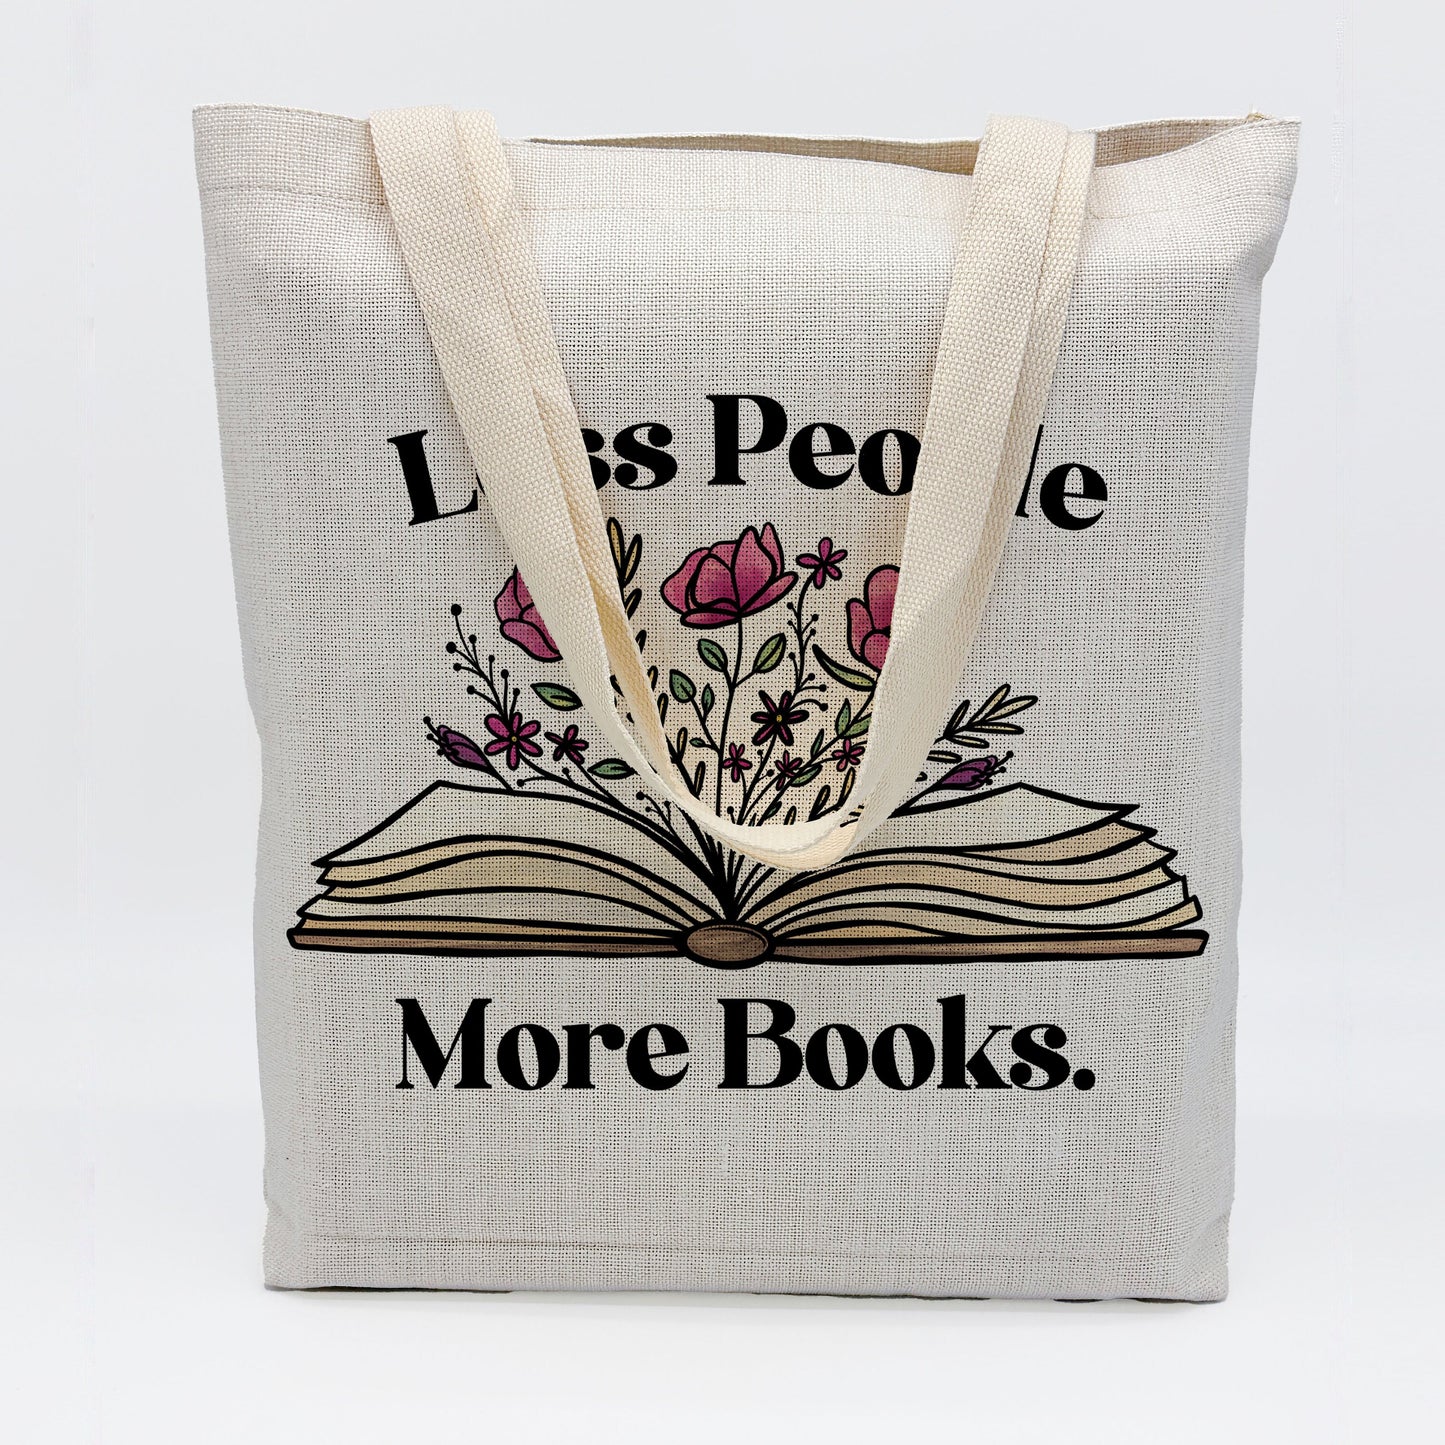 a tote bag with a book printed on it